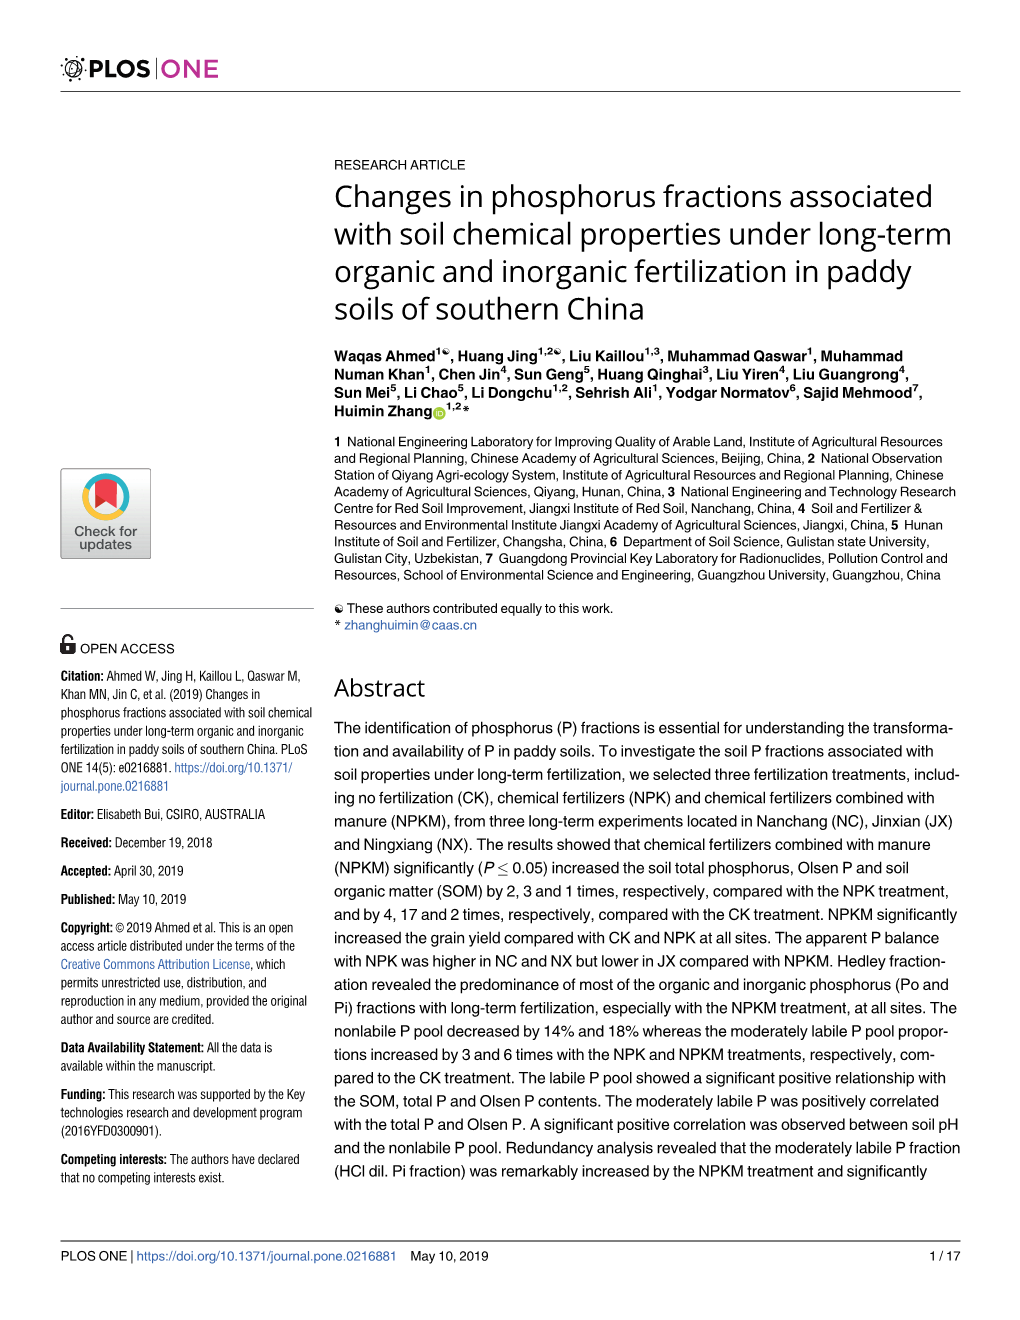 Changes in Phosphorus Fractions Associated with Soil Chemical Properties Under Long-Term Organic and Inorganic Fertilization in Paddy Soils of Southern China